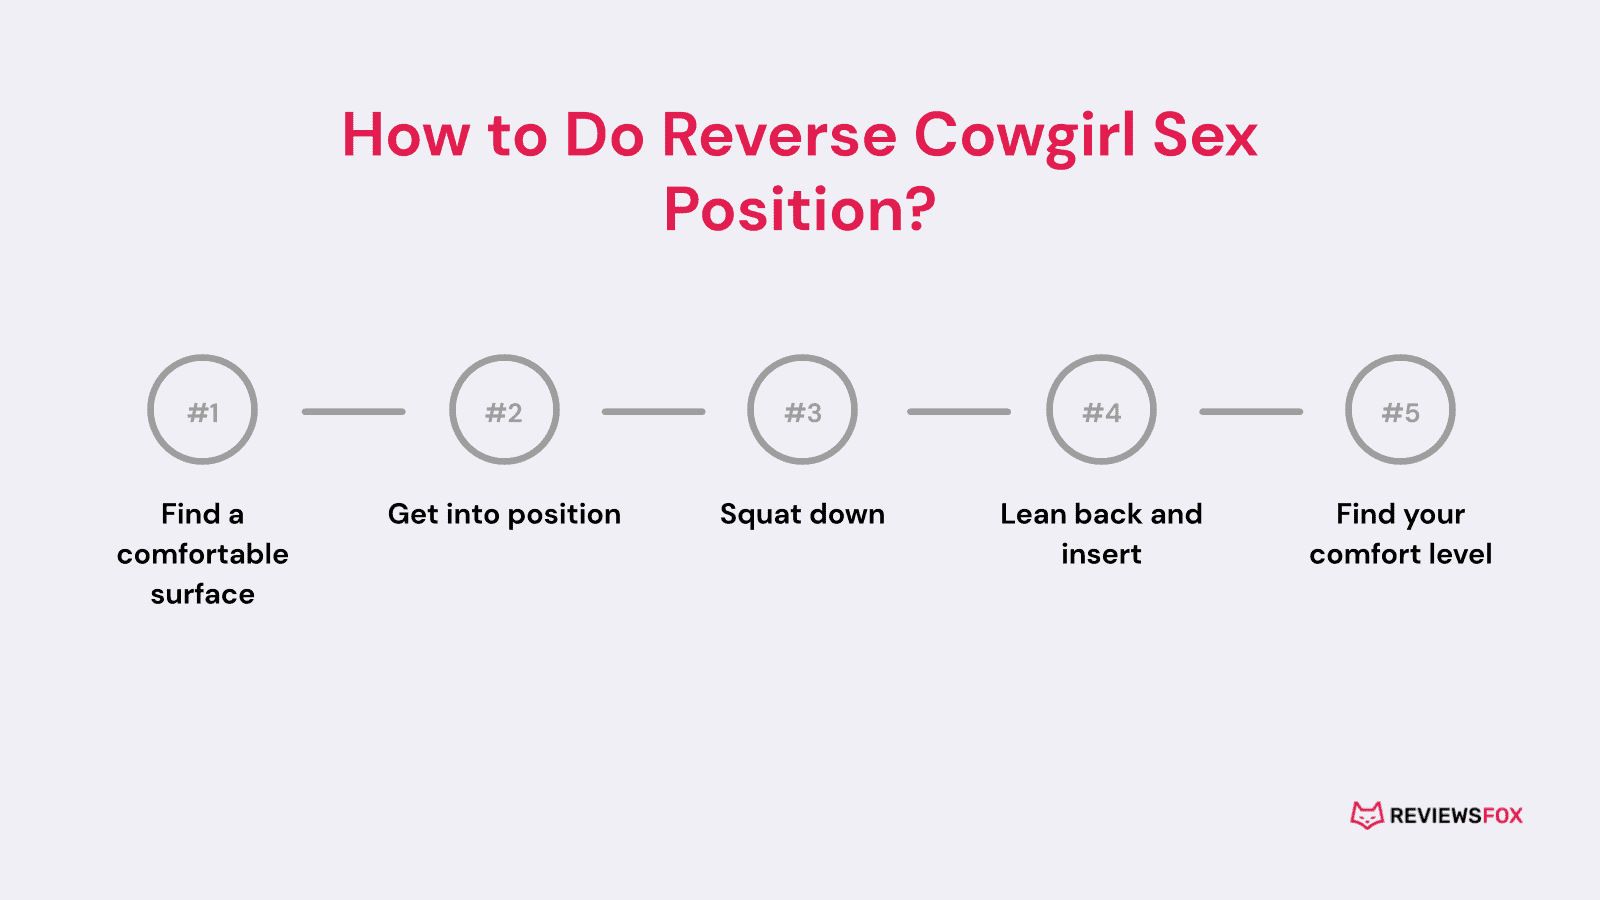 How to do Reverse Cowgirl sex position